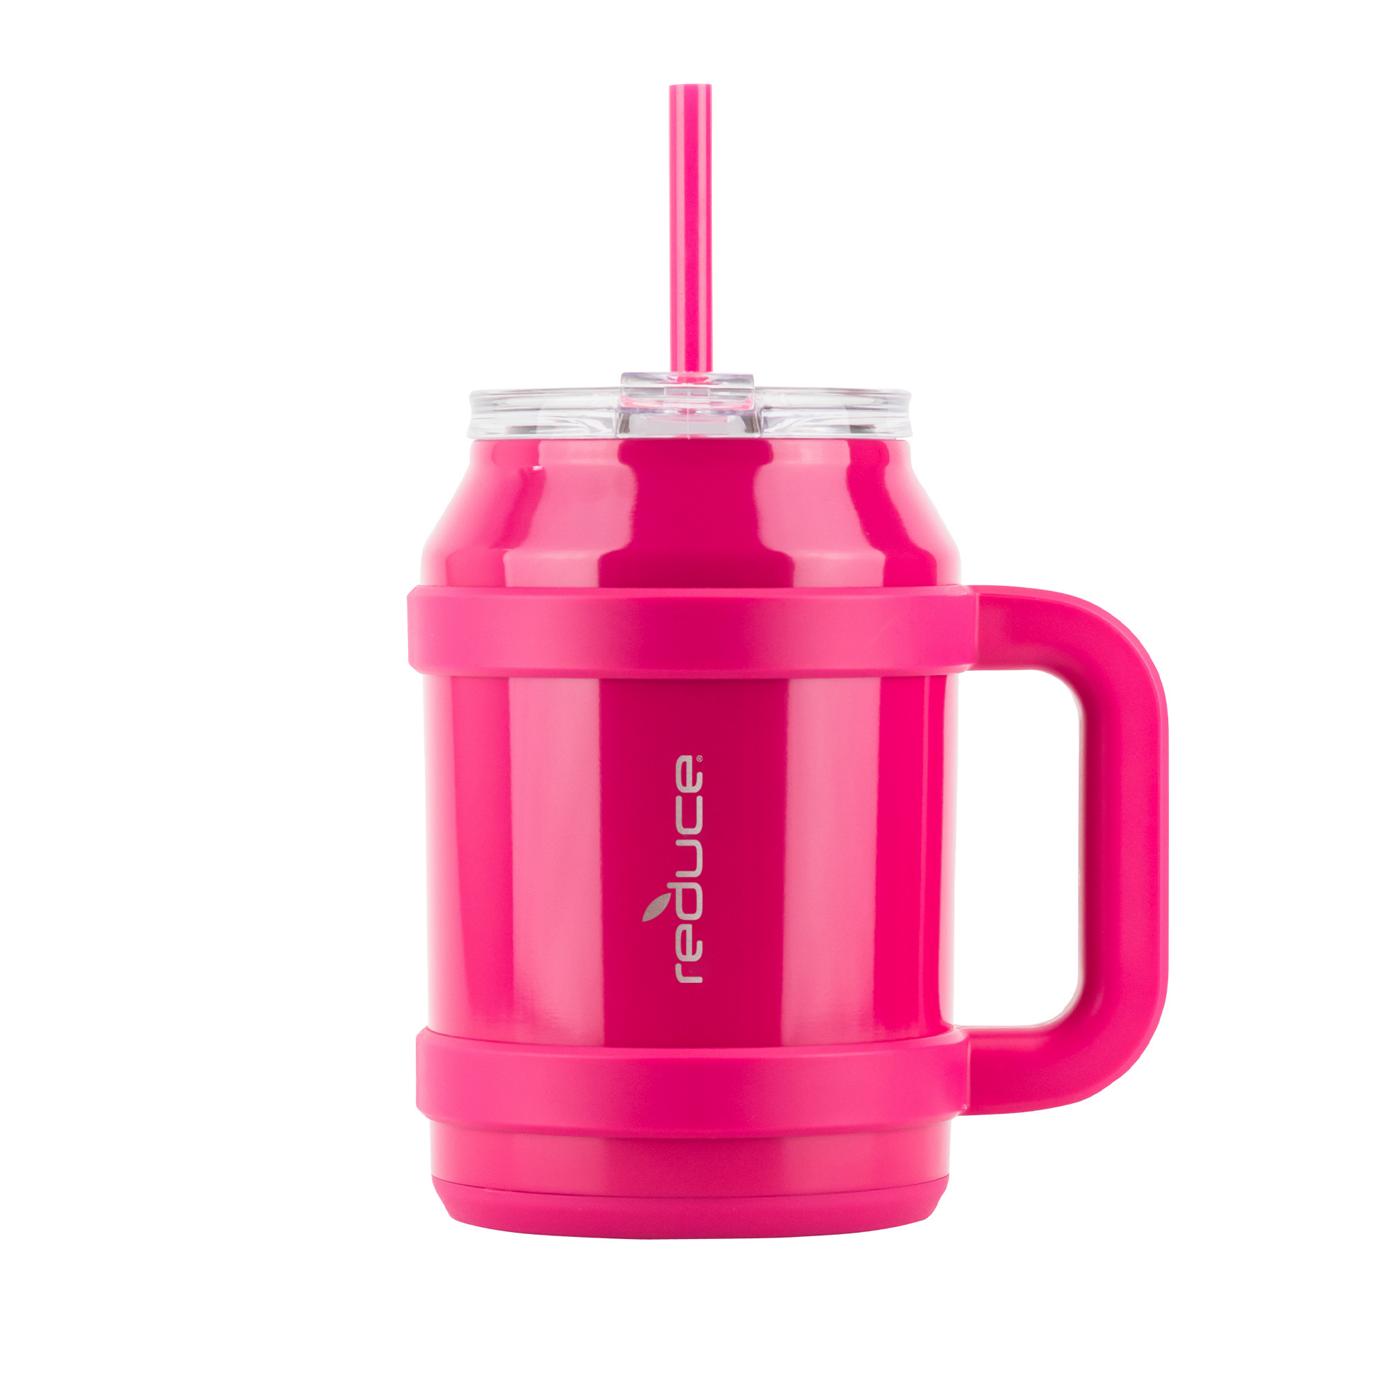 Reduce Cold1 Vacuum Insulated Stainless Steel Mug with Lid & Straw - Orchid; image 1 of 5